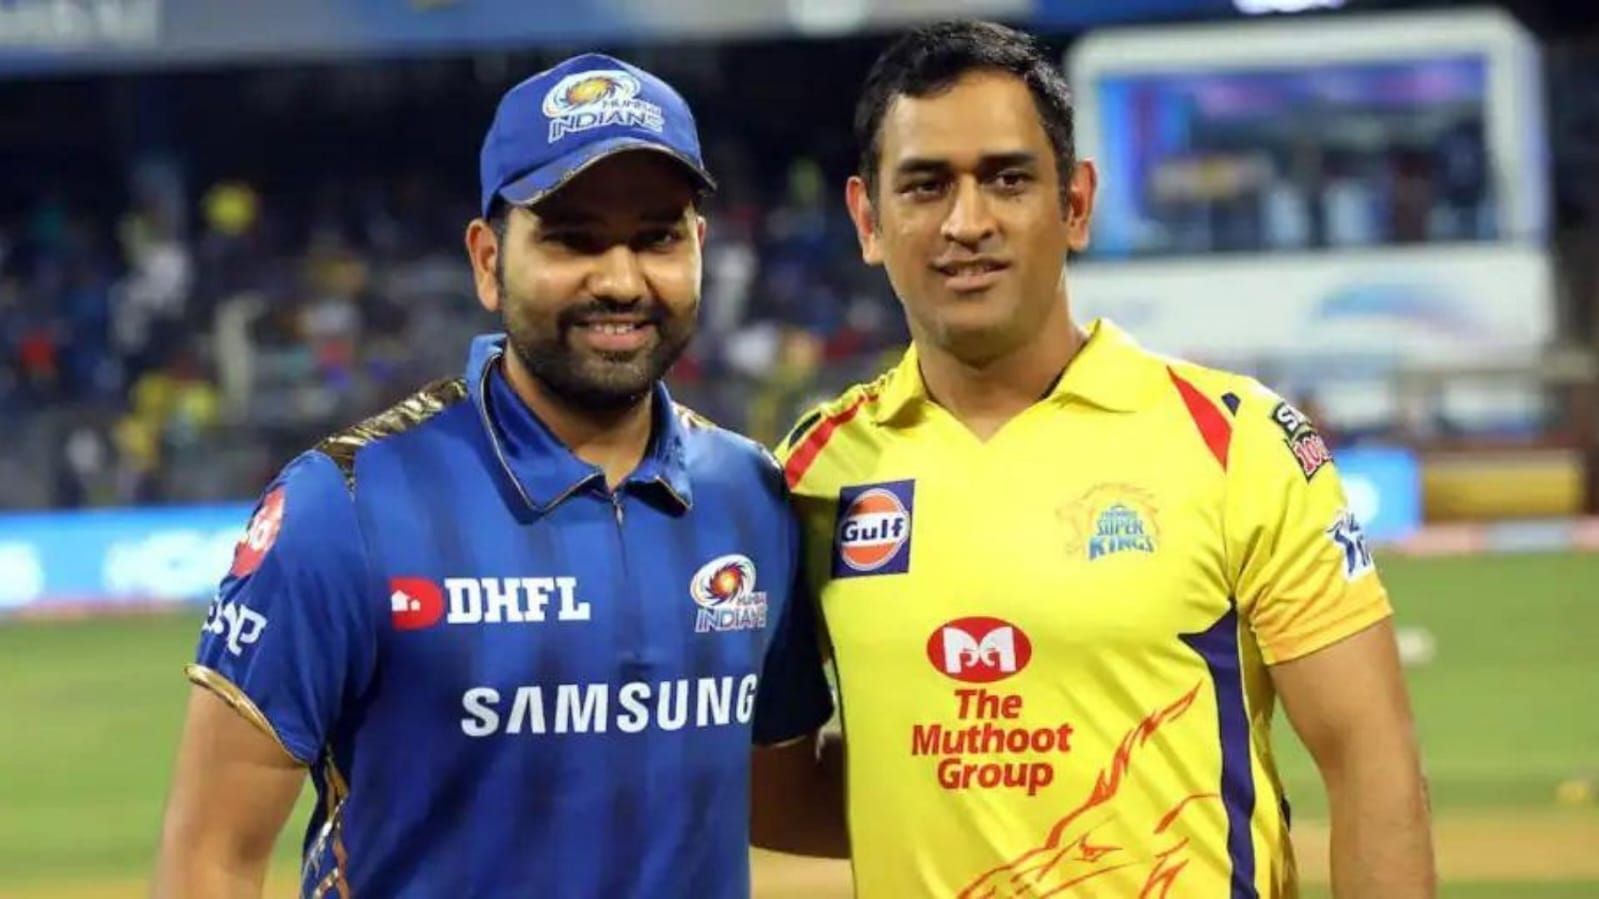 Rohit Sharma and M.S. Dhoni are the two most successful IPL captains.